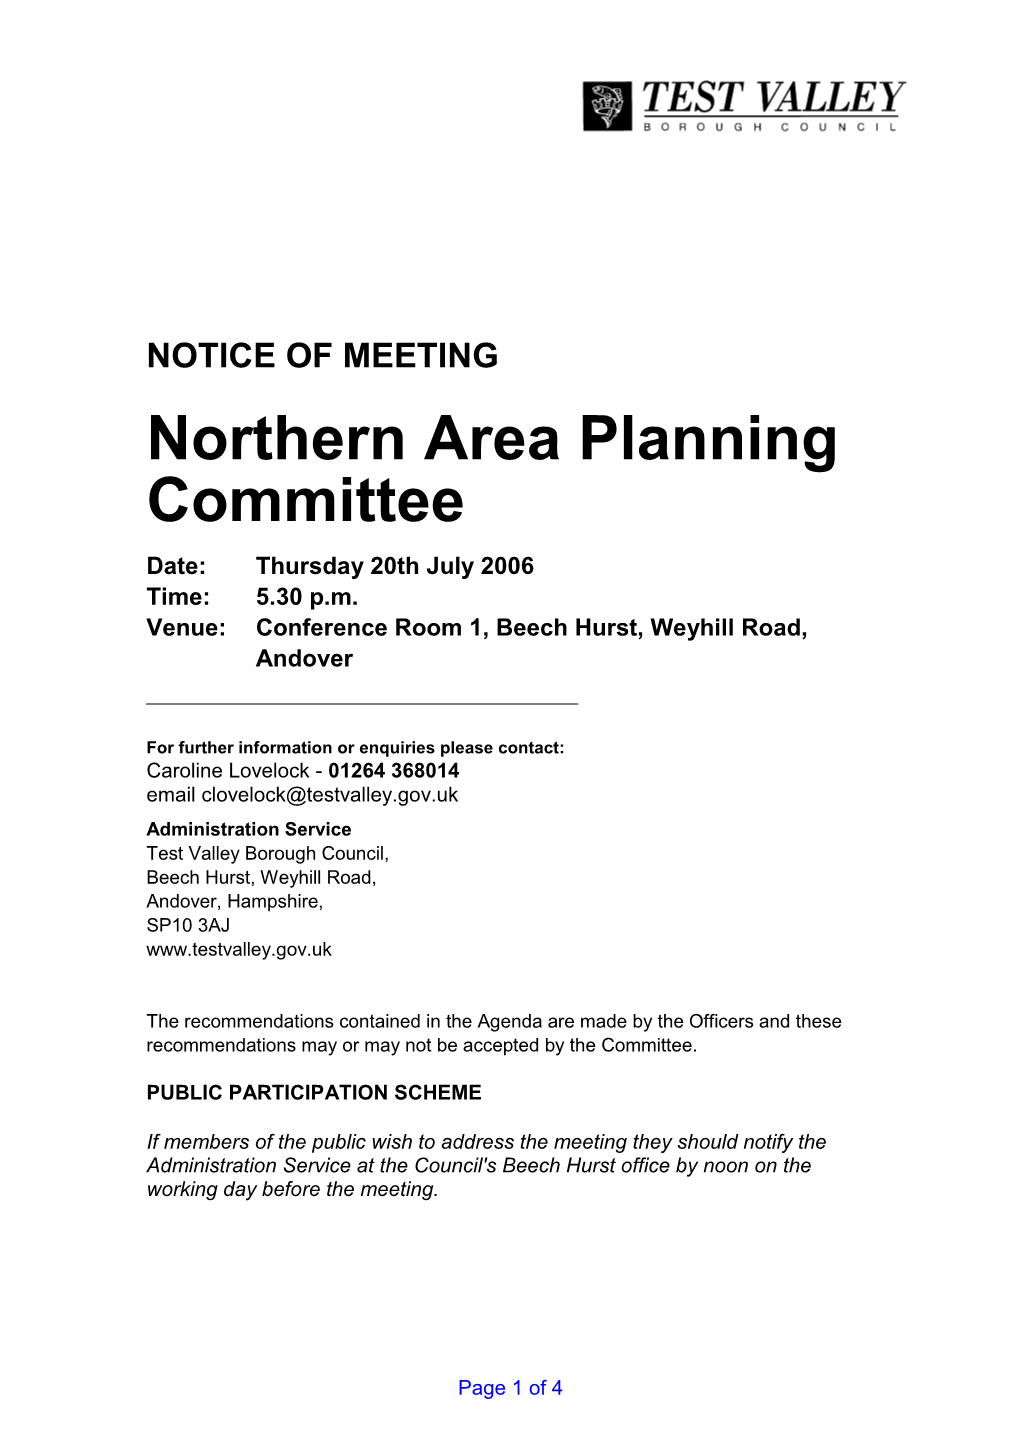 Northern Area Planning Committee Date: Thursday 20Th July 2006 Time: 5.30 P.M